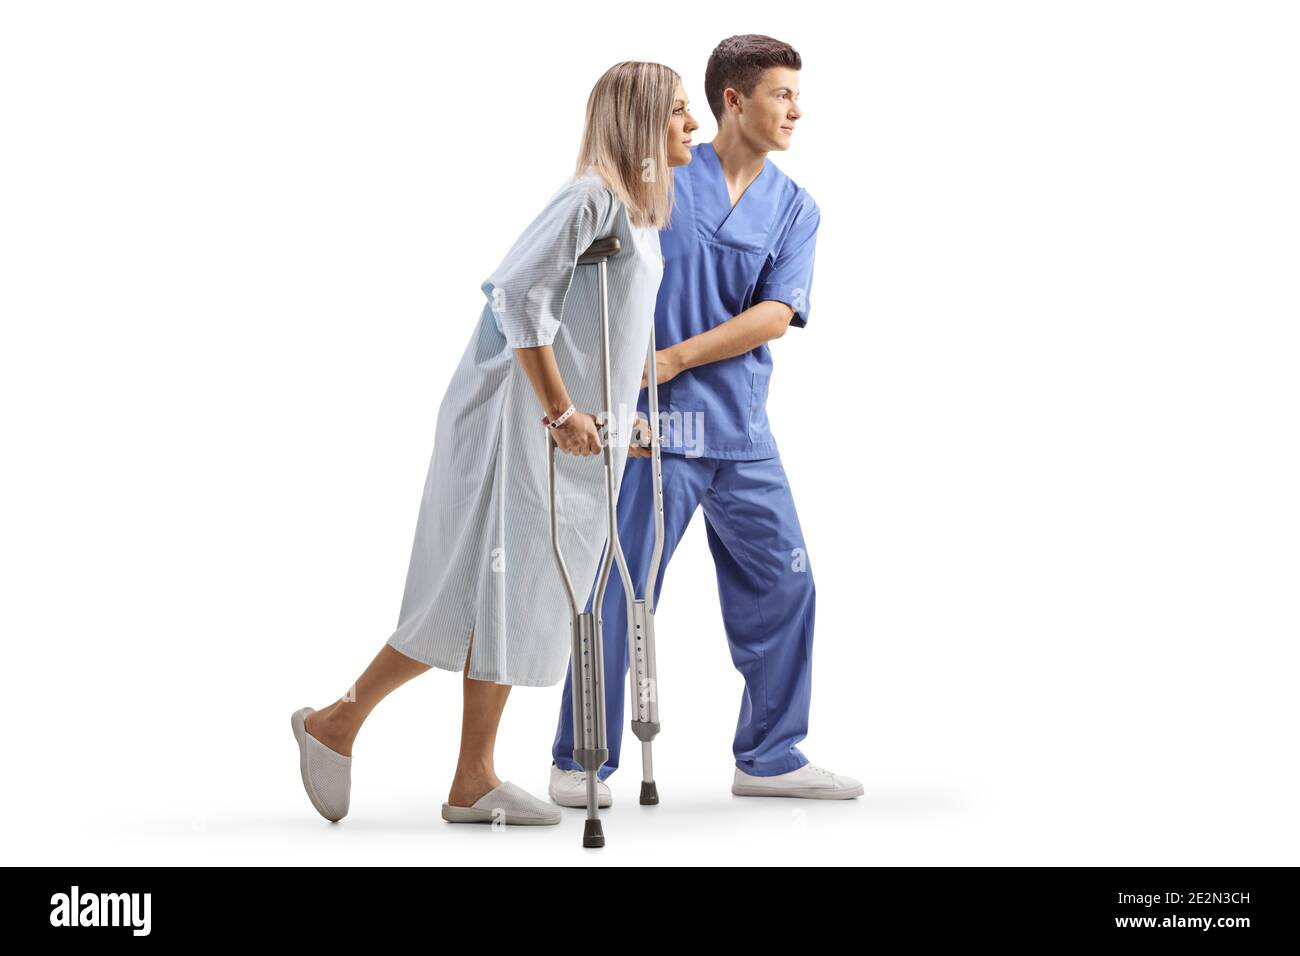 Male doctor helping a female patient with crutches isolated on white background Stock Photo